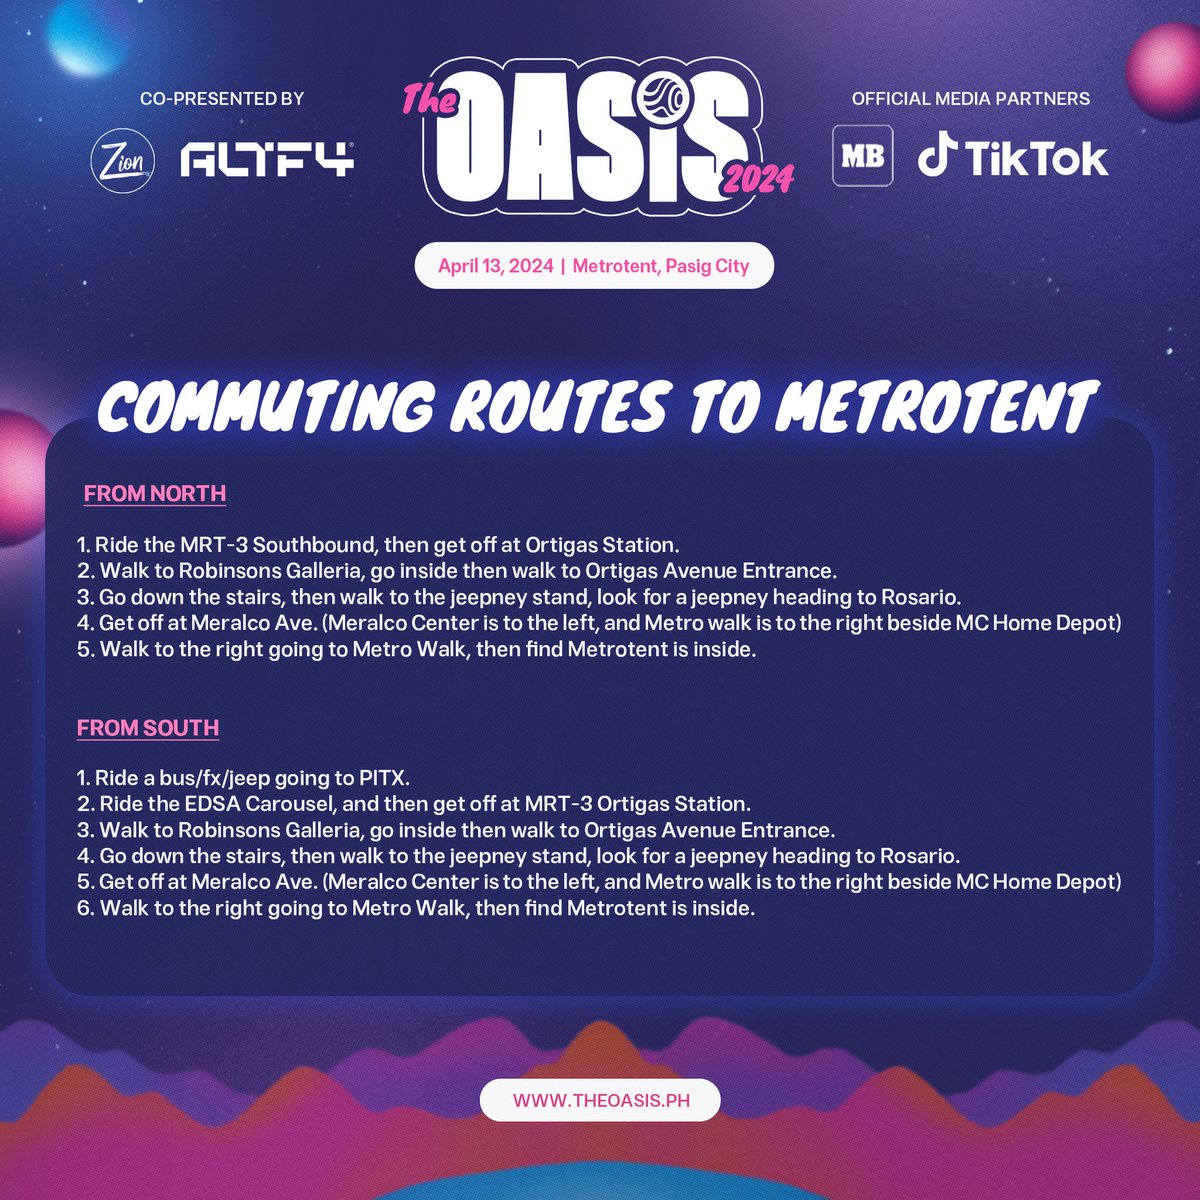 ALL ROADS LEAD TO THE OASIS

Here is a quick commute guide going to The OASIS. We are located at Metrotent in Pasig City.

#TheOASIS2024 #SinceDayOne